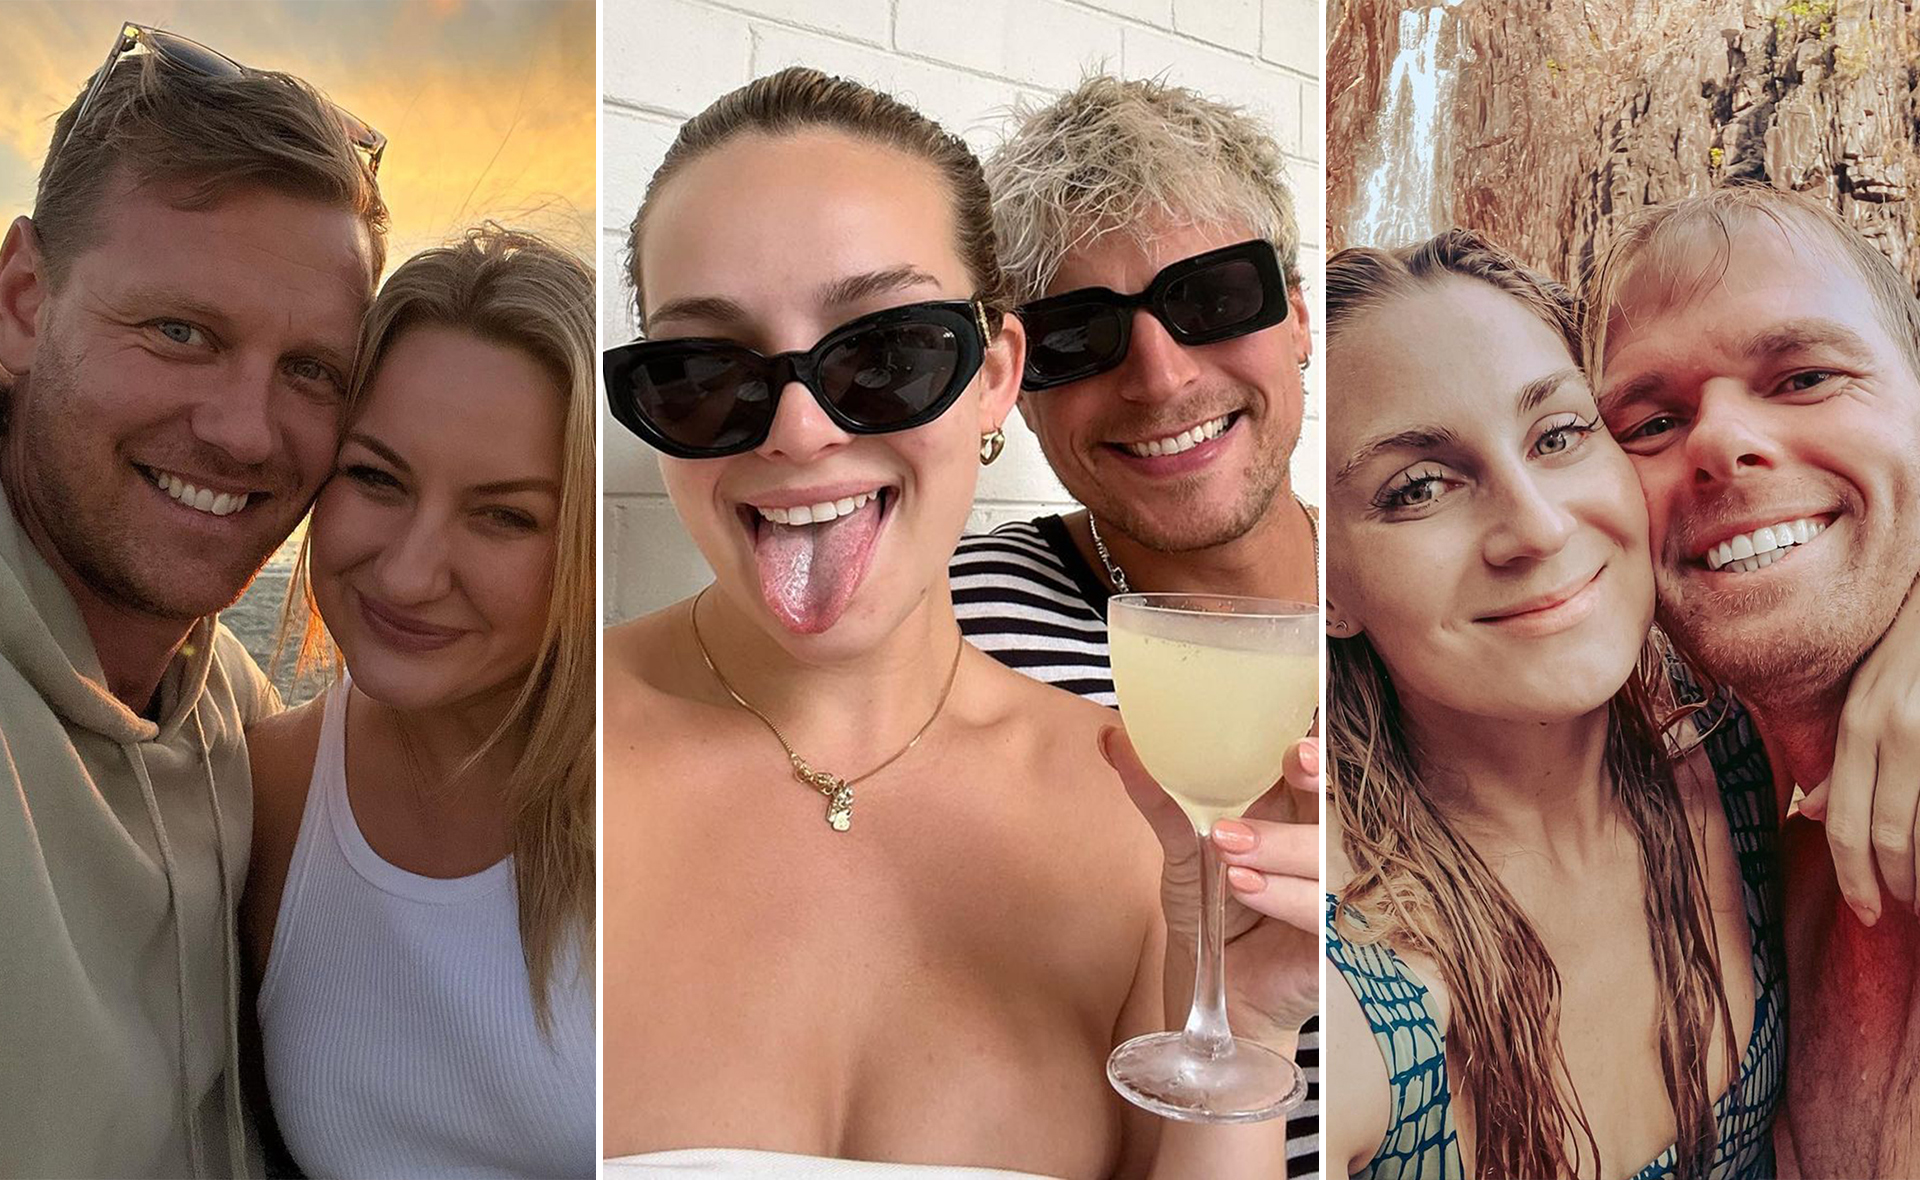 Former Bachelor stars just can’t stop hooking up with each other! Meet the couples who started dating after the cameras stopped rolling